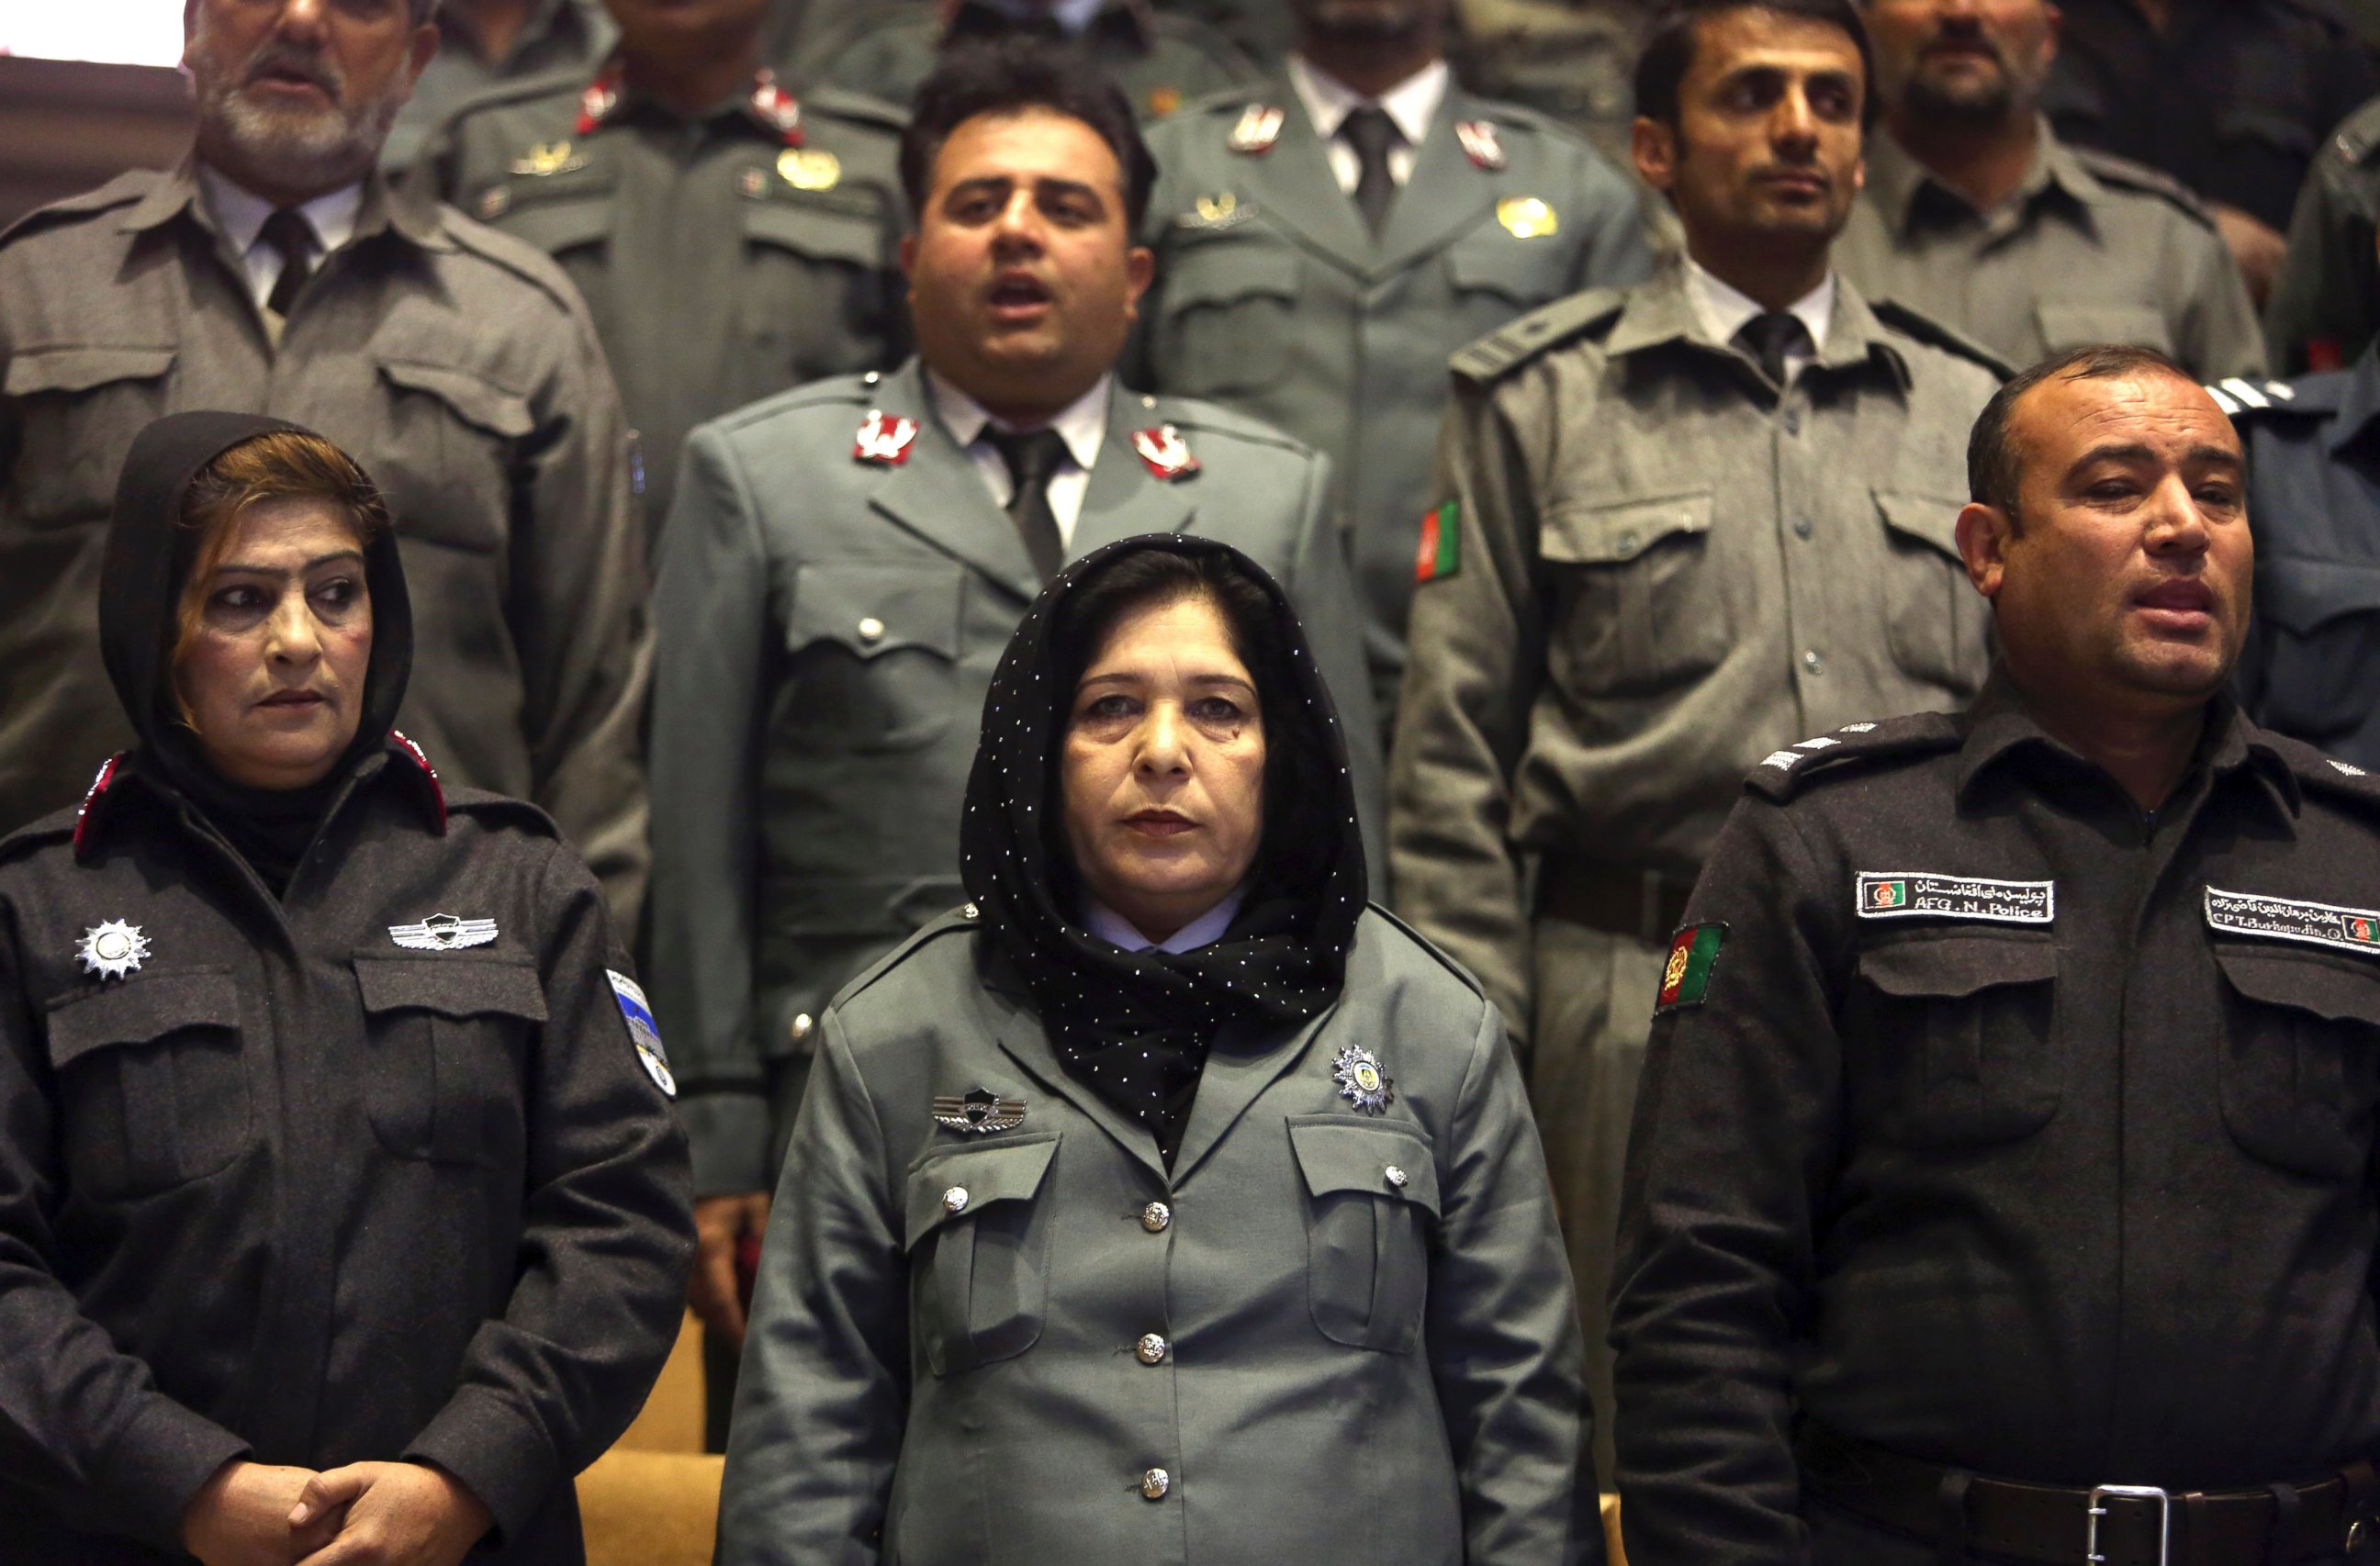 PHOTO: In this picture taken on Sunday, Dec. 21, 2014, Afghanistan's police officers participate in a graduation ceremony in Kabul, Afghanistan. 